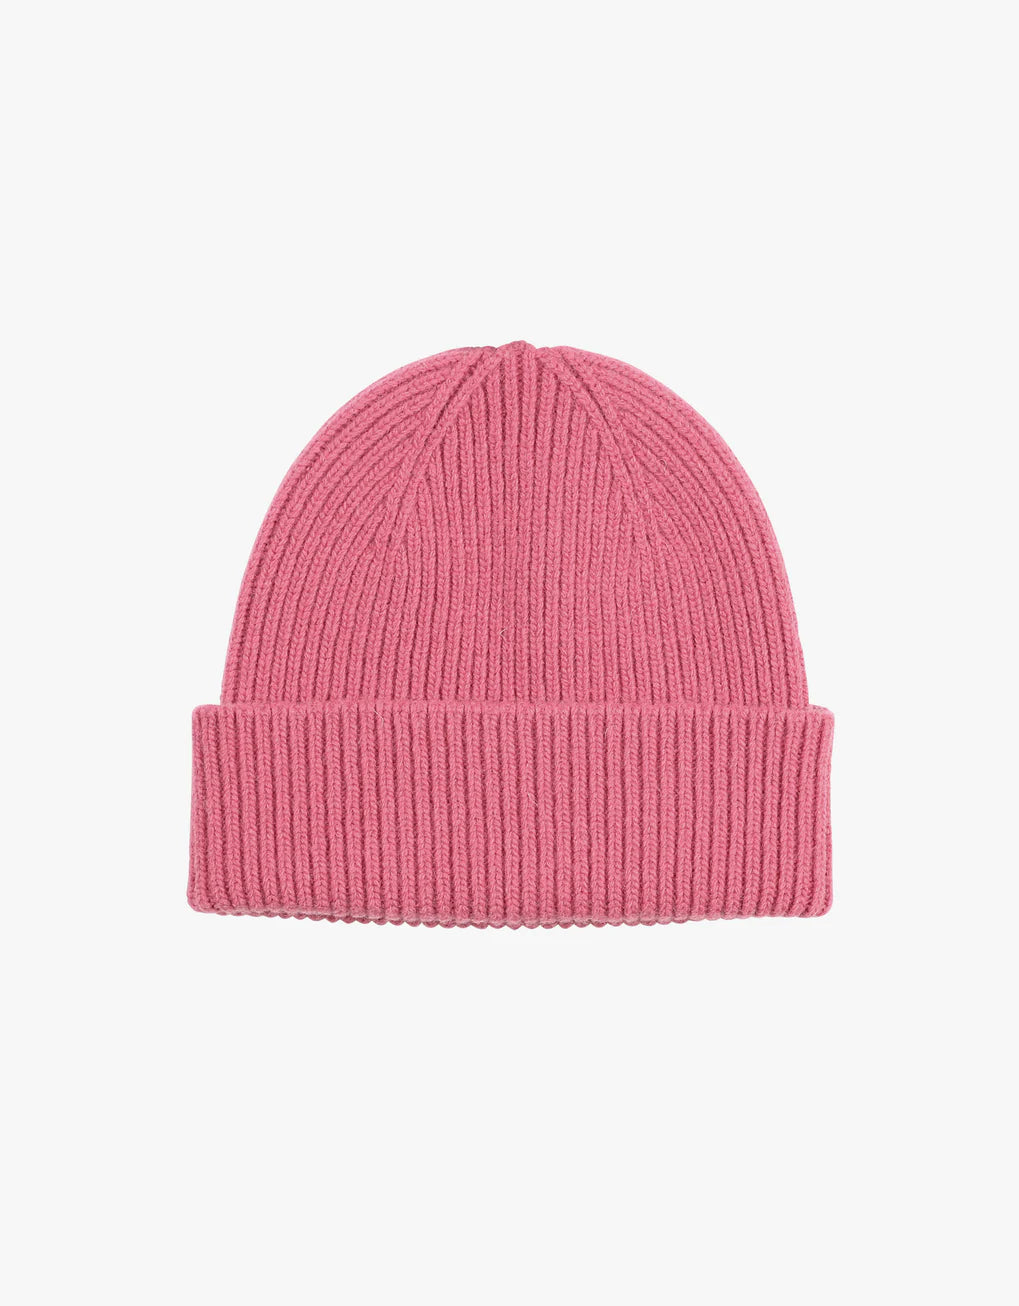 A Colorful Standard Merino Wool Beanie in pink, perfect for the season, placed on a white background.